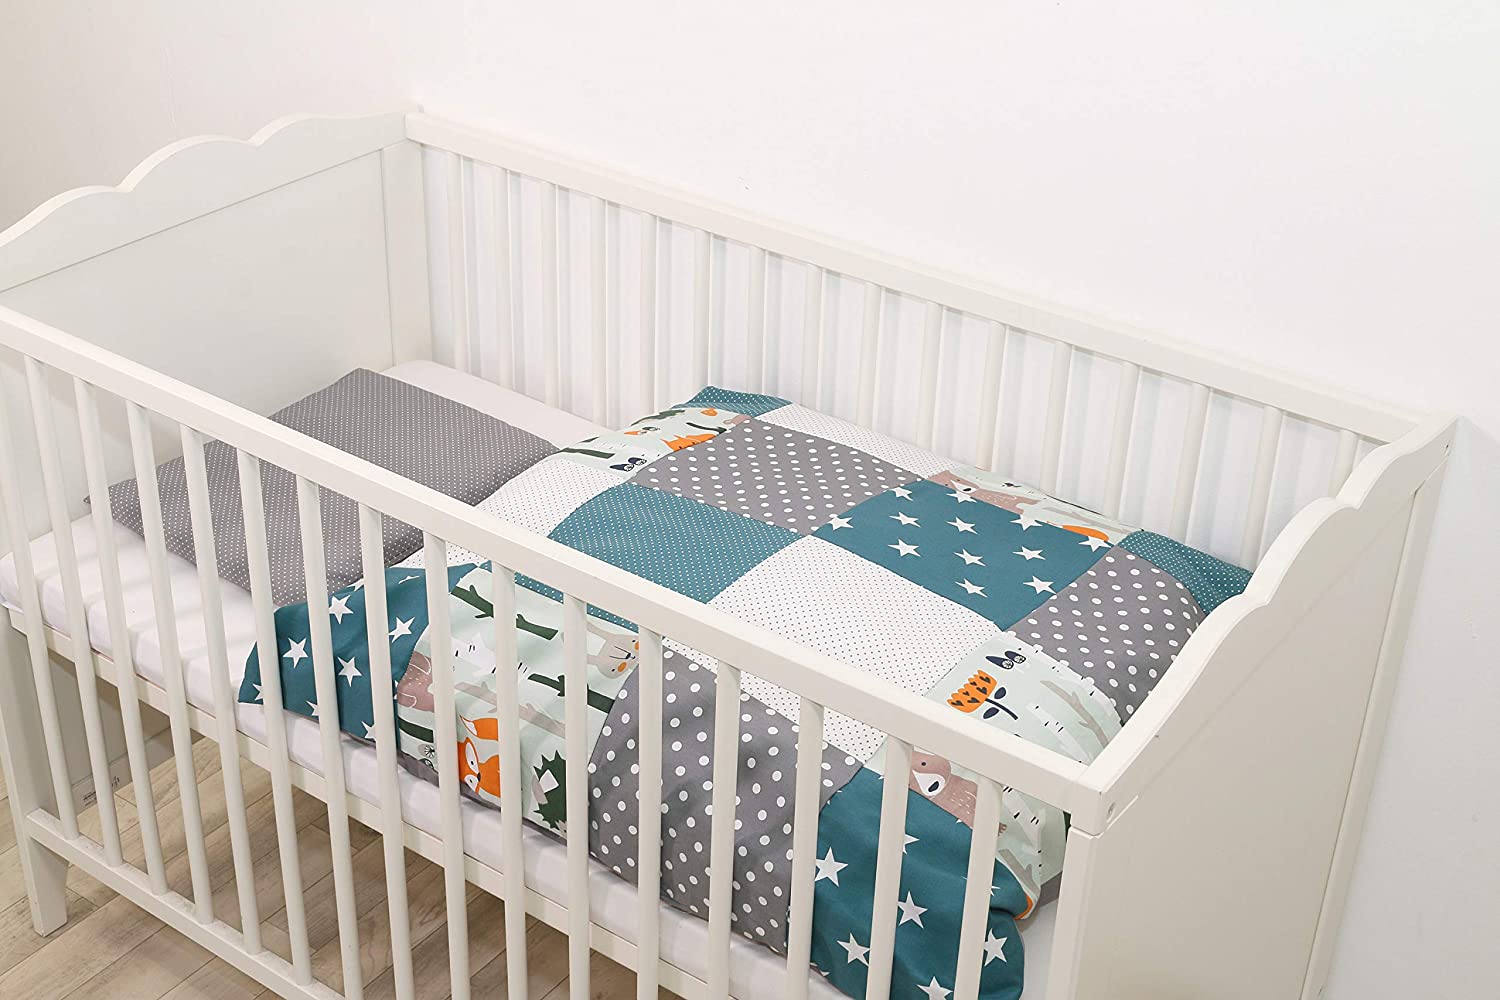 Ullenboom ® Baby Bedding Set - 2 Pieces (Complete): Baby bed linen 80 x 80 cm and pillowcase 35 x 40 cm, baby bed set for the baby bed made from 100% cotton. Forest Animals Petrol